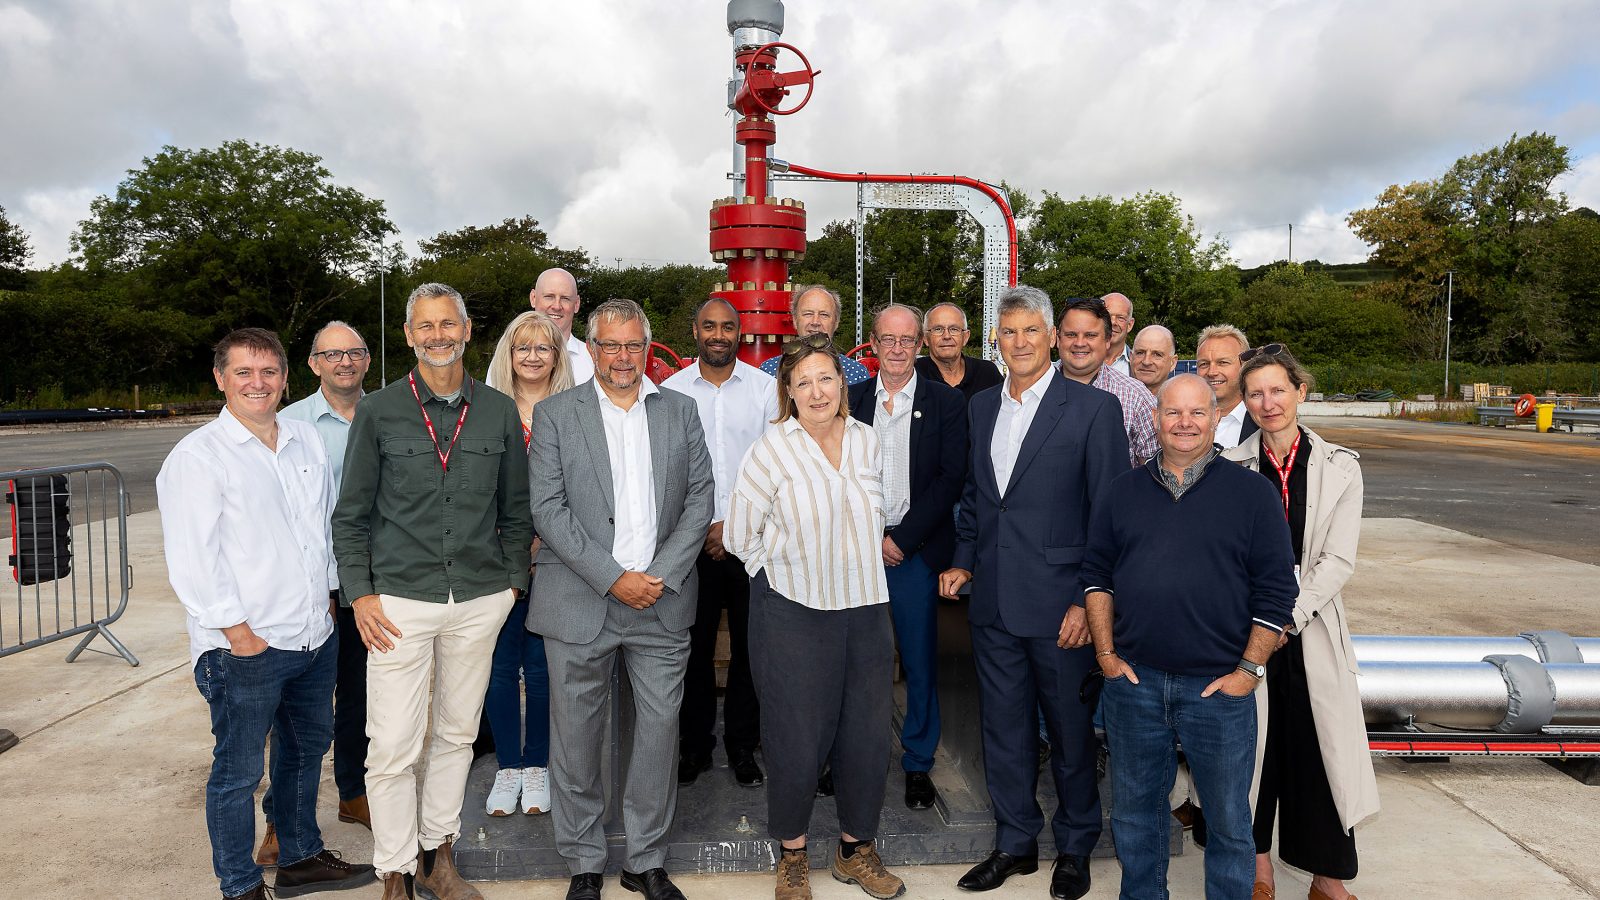 Sir Tim Smit and Gus Grand christen the well head (aka the 'Christmas tree'!) with Cornish Rum and are joined by members of the Geothermal team and other stakeholders.